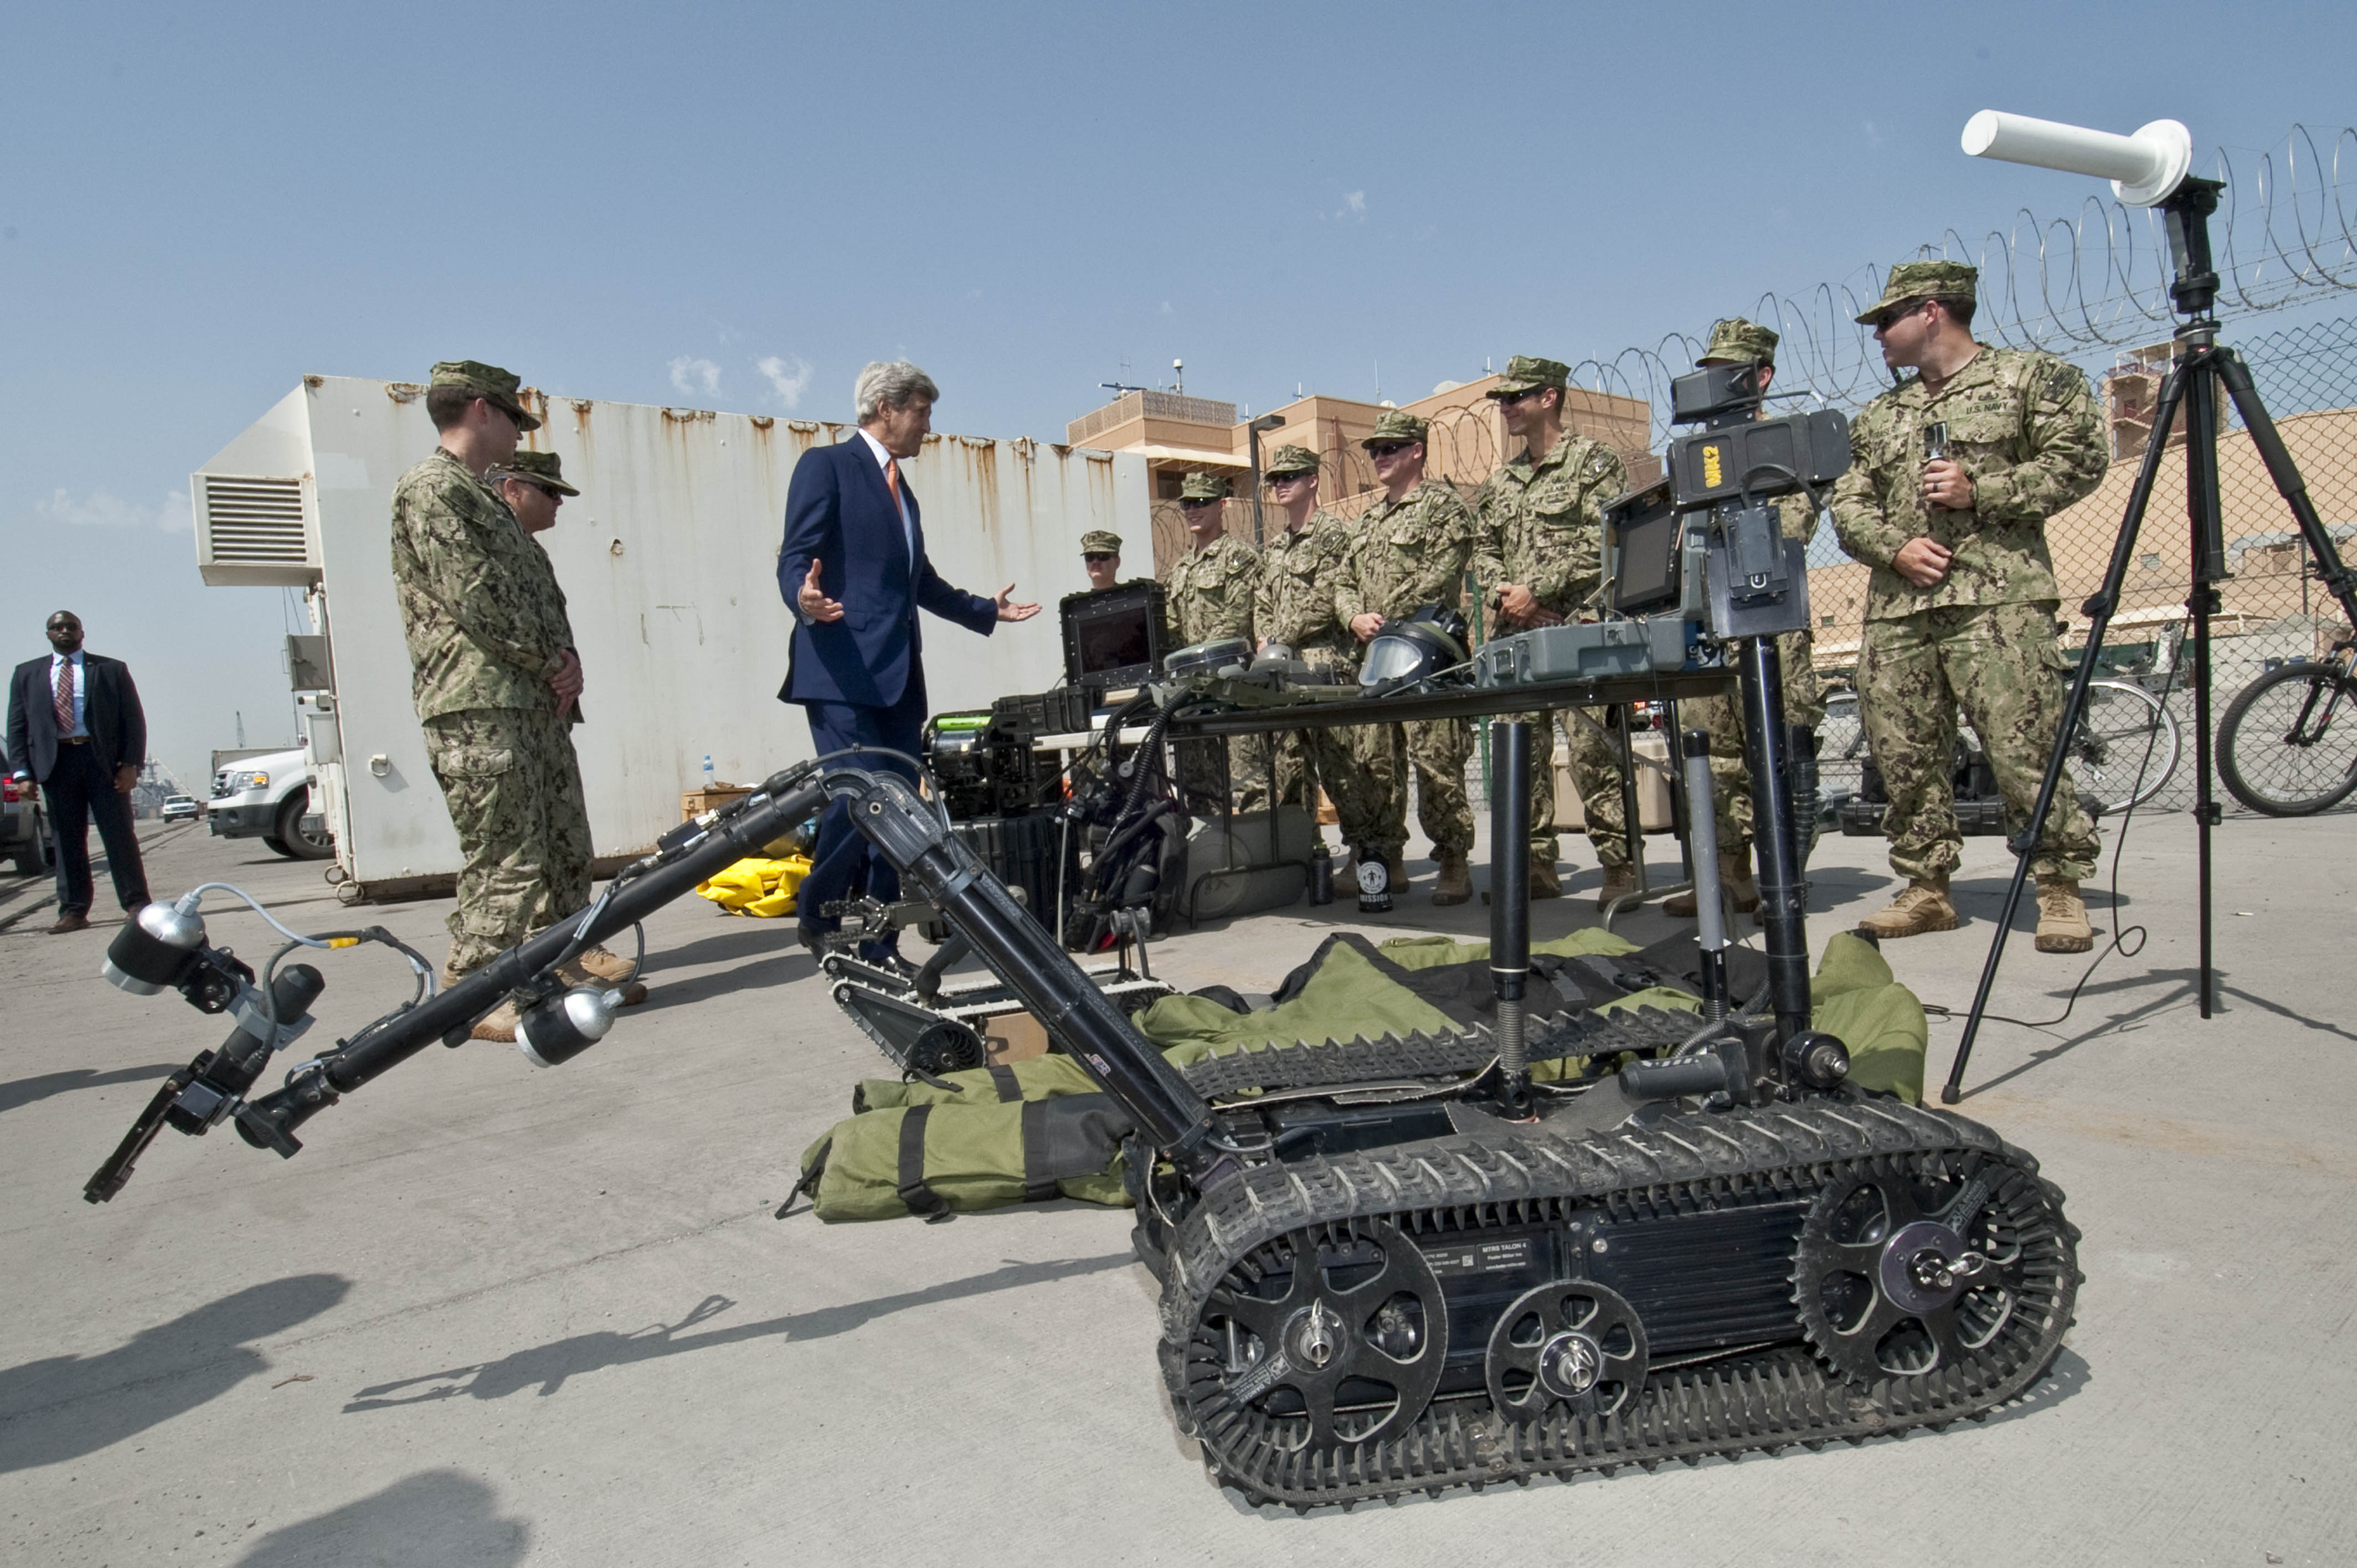 160407-N-GC639-136 
MANAMA, Bahrain (April 07, 2016)  U.S. Secretary of State John Kerry speaks with Sailors assigned to Task Force 56 about explosive ordnance equipment at Naval Support Activity Bahrain. The secretary visited Sailors of the U.S. 5th Fleet as part of his current travel to the region. (U.S. Navy photo by Mass Communication Specialist 2nd Class Ryan D. McLearnon/Released)